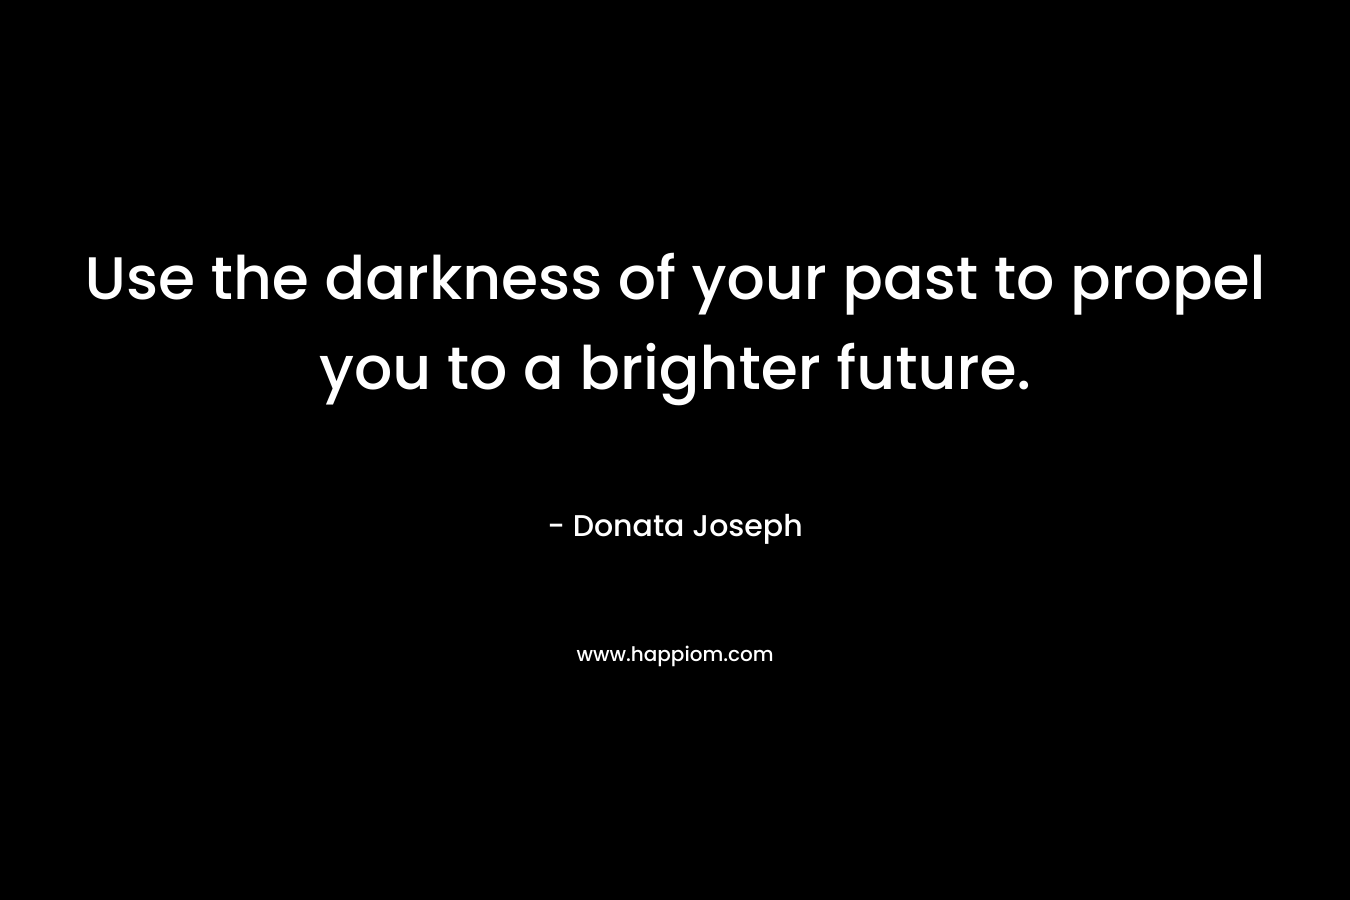 Use the darkness of your past to propel you to a brighter future. – Donata Joseph